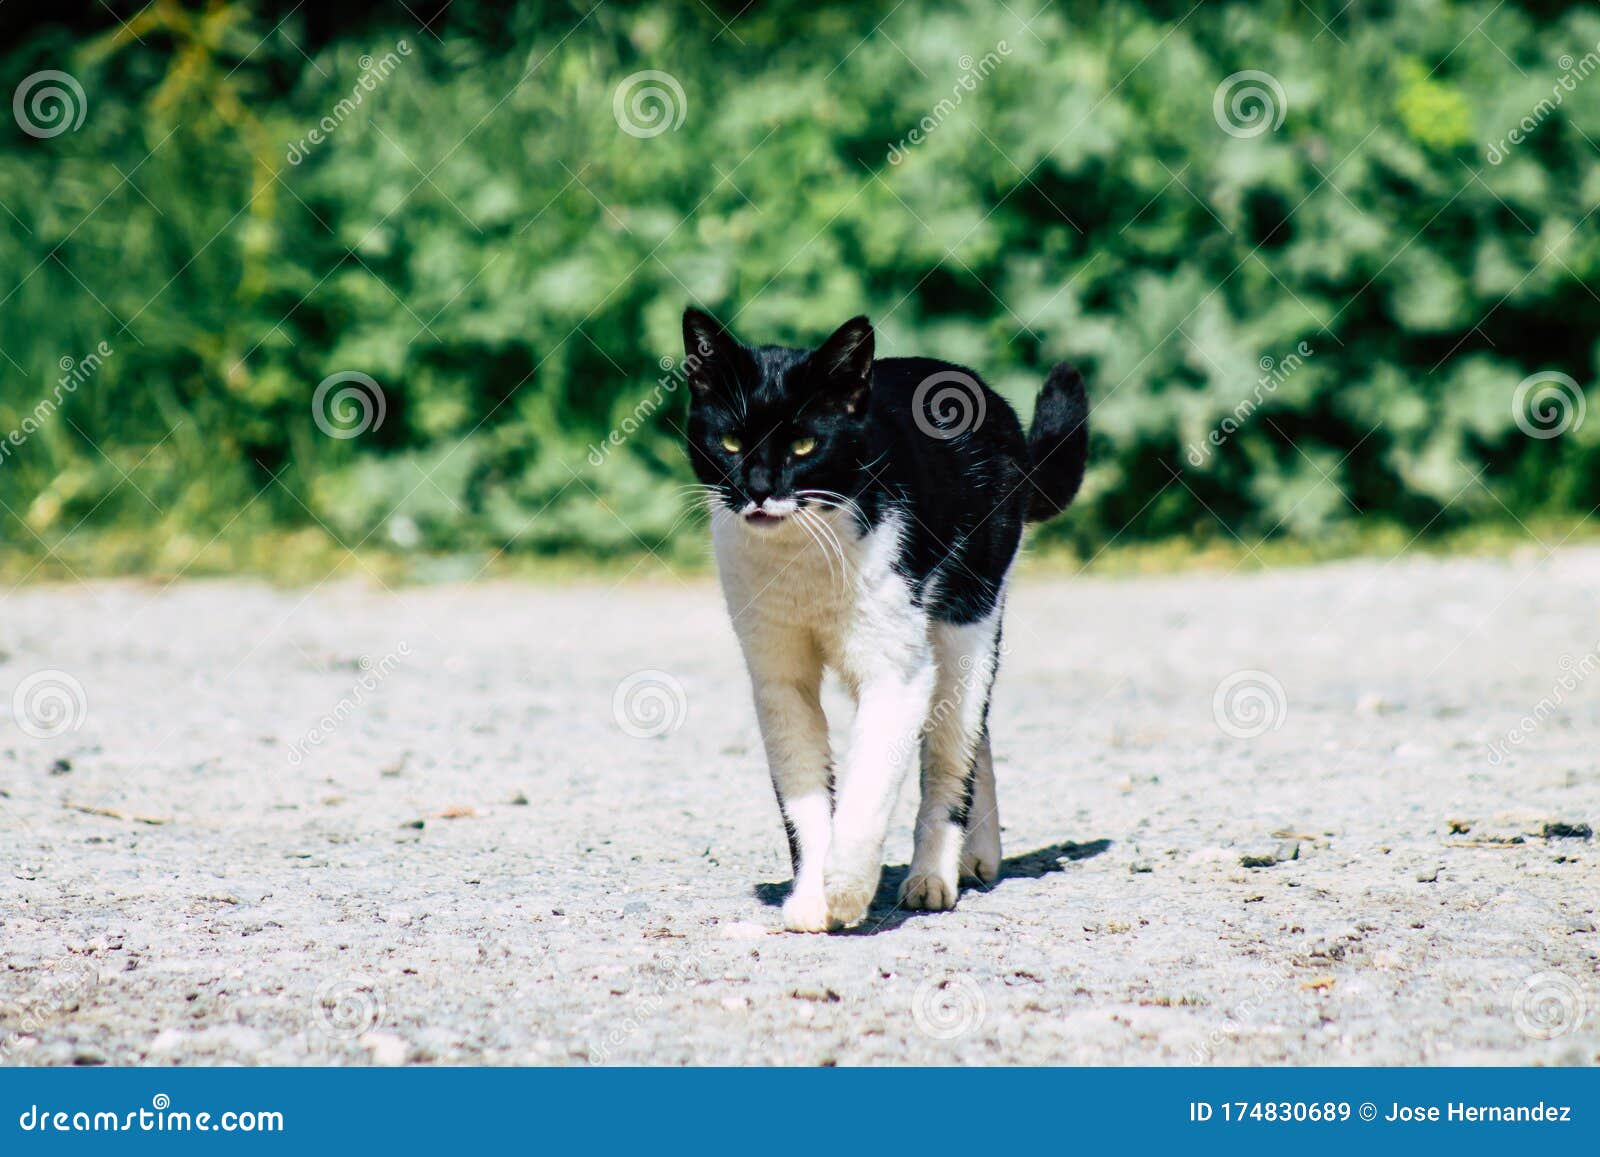 Colors Of Cyprus Stock Image Image Of Travel Kitten 174830689